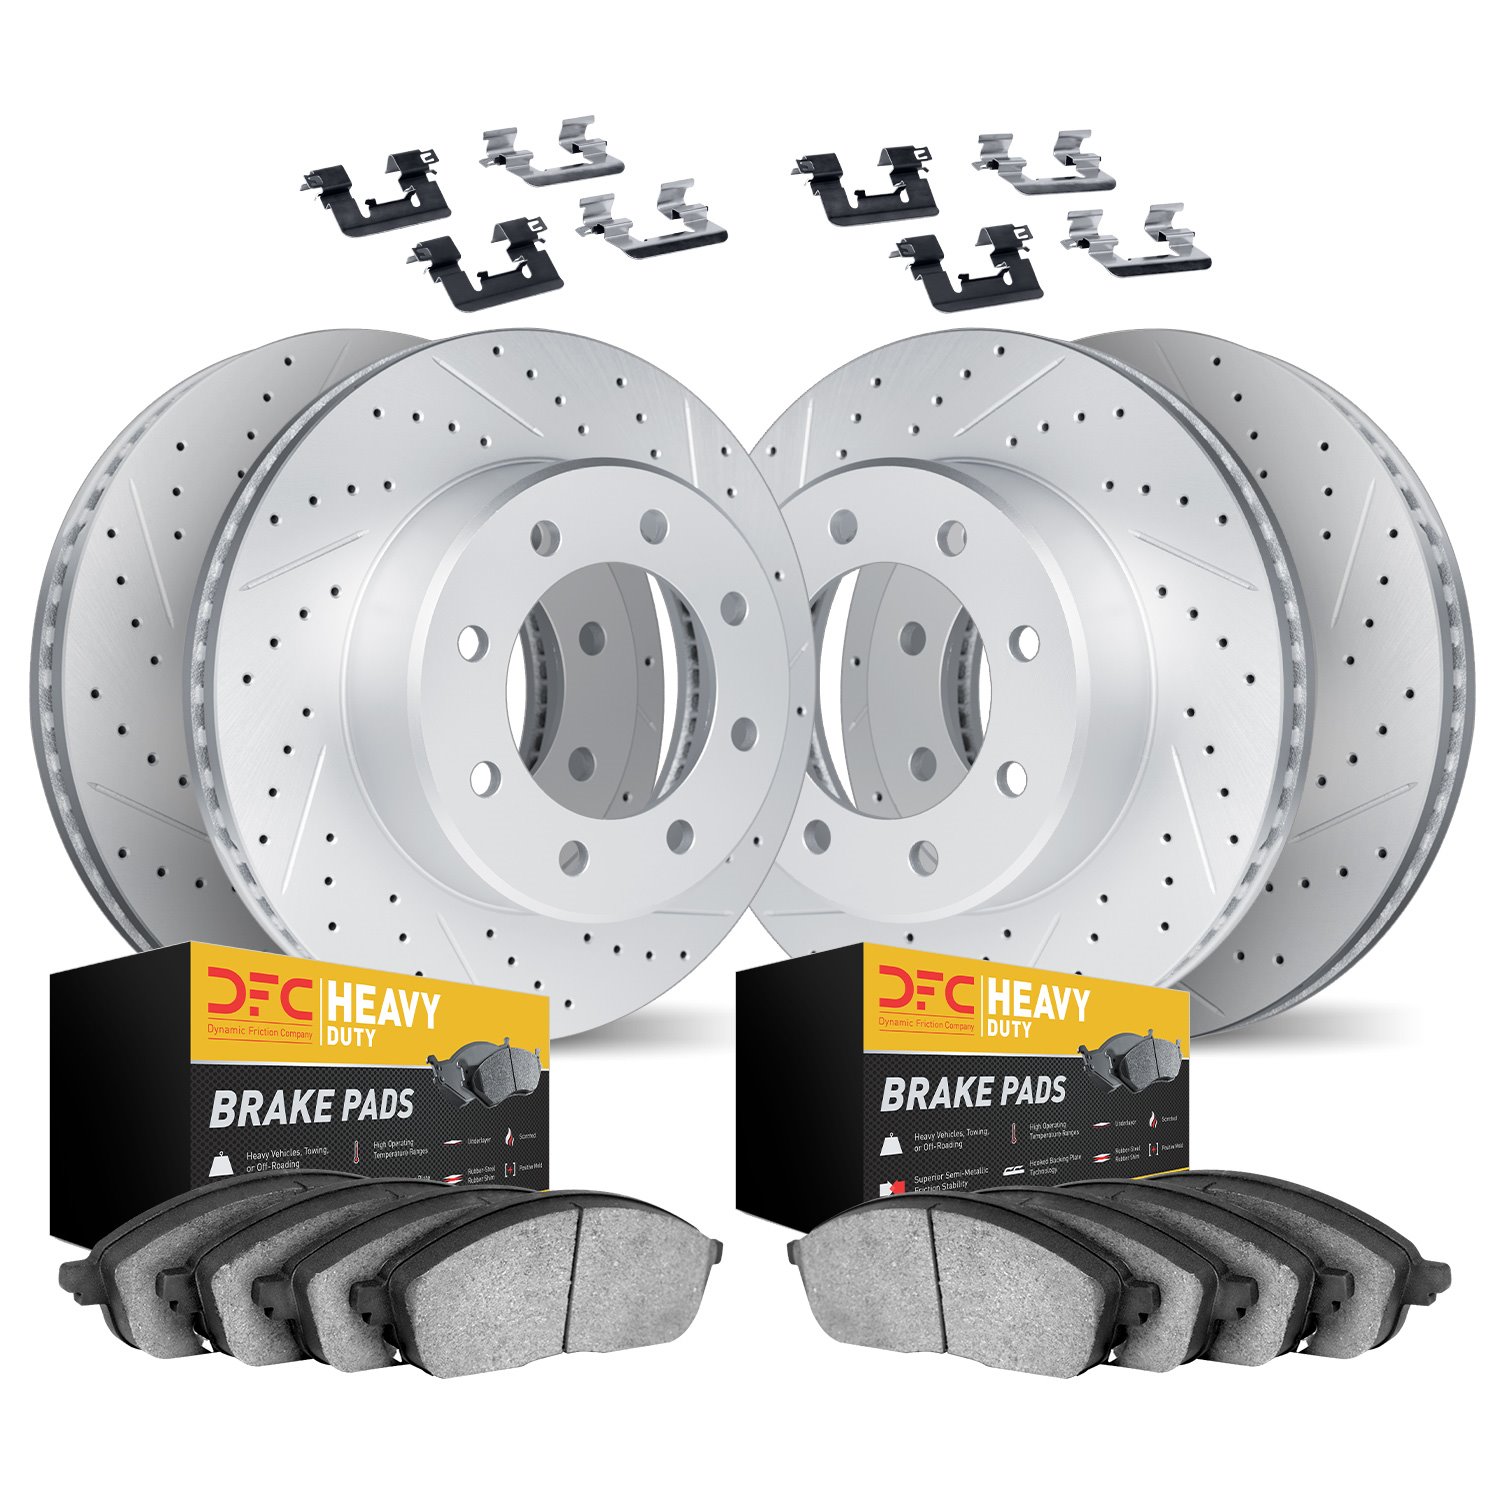 2214-99054 Geoperformance Drilled/Slotted Rotors w/Heavy-Duty Pads Kit & Hardware, 1999-2002 Ford/Lincoln/Mercury/Mazda, Positio